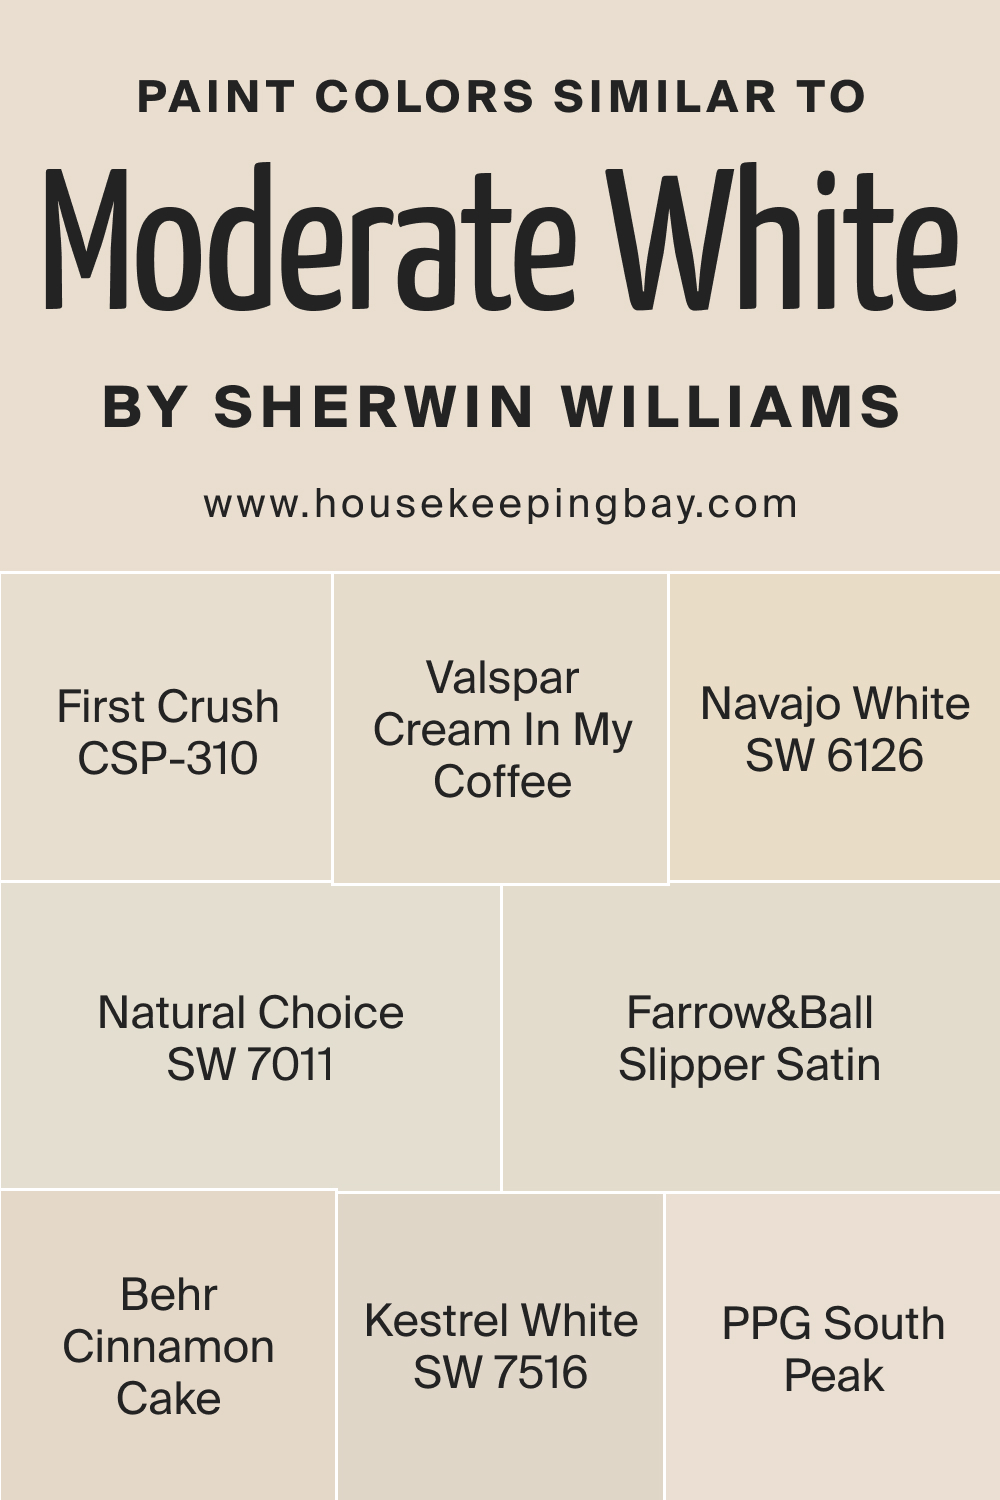 Paint Colors Similar to SW Moderate White by Sherwin Williams